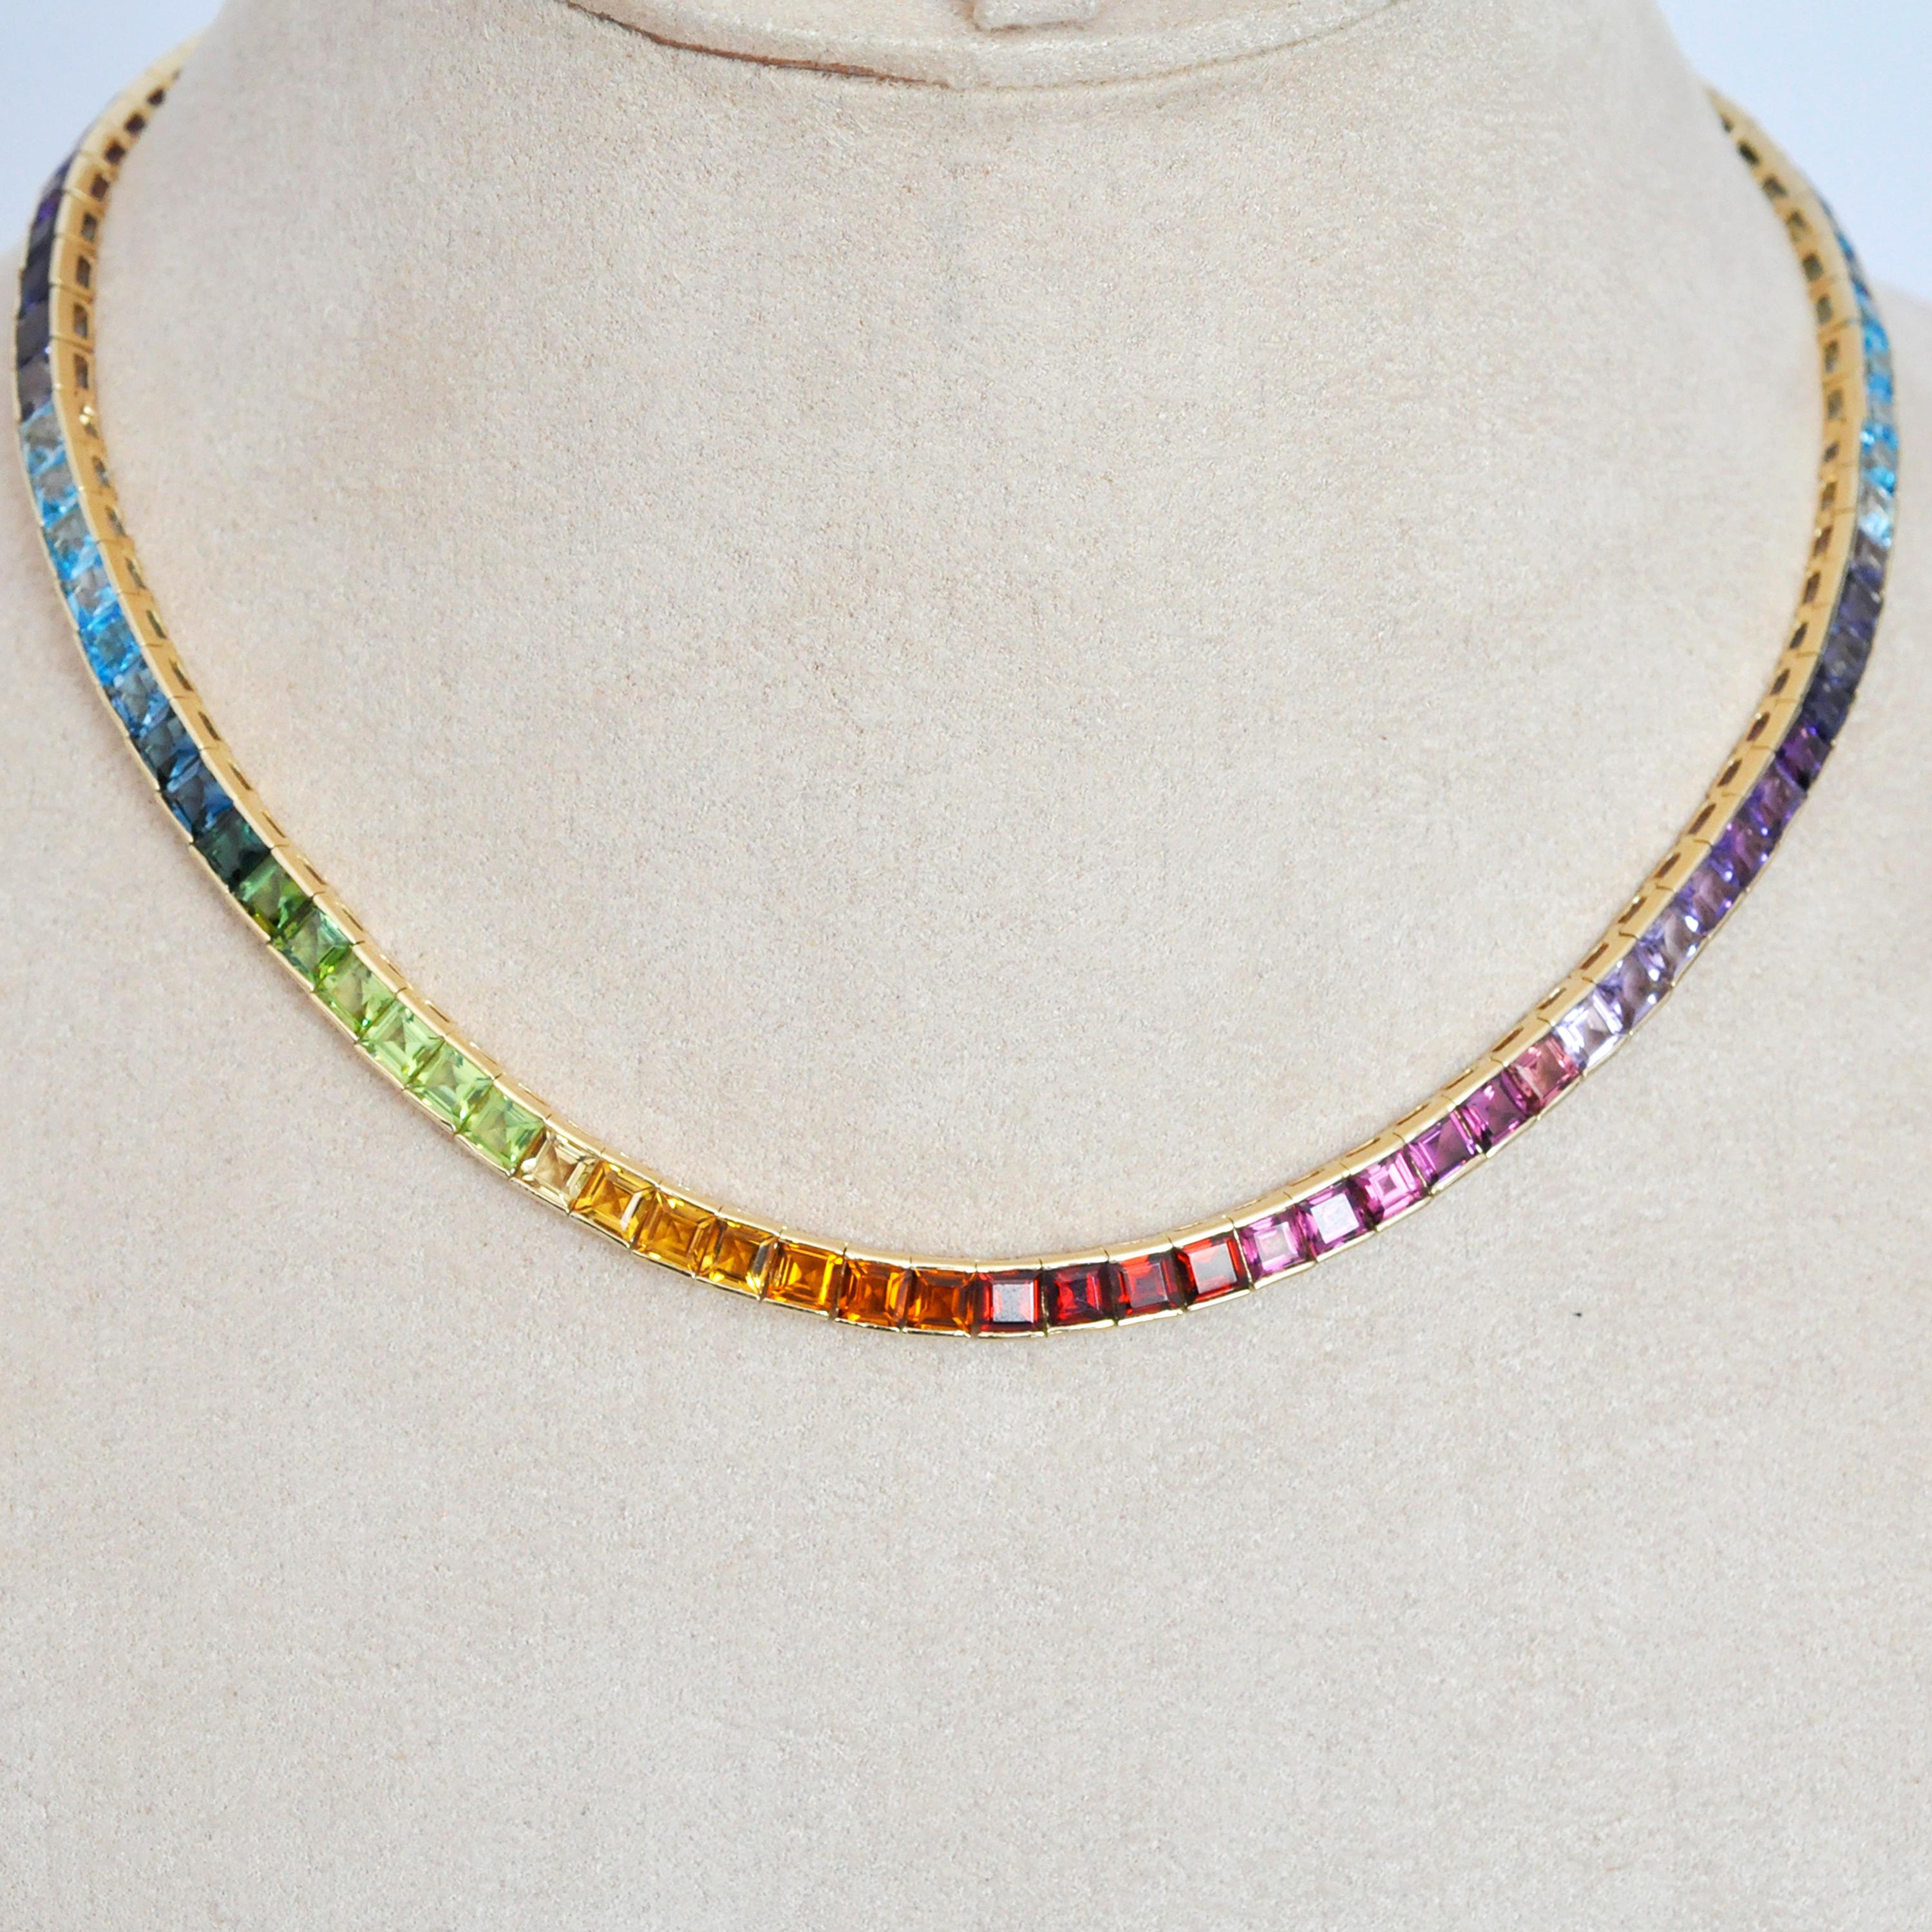 18 karat yellow gold multicolour rainbow natural gemstone tennis line necklace

This seamless multicolour rainbow tennis link necklace set in 18 karat gold is an absolute stunner. The rainbow necklace features lustrous natural gemstones like